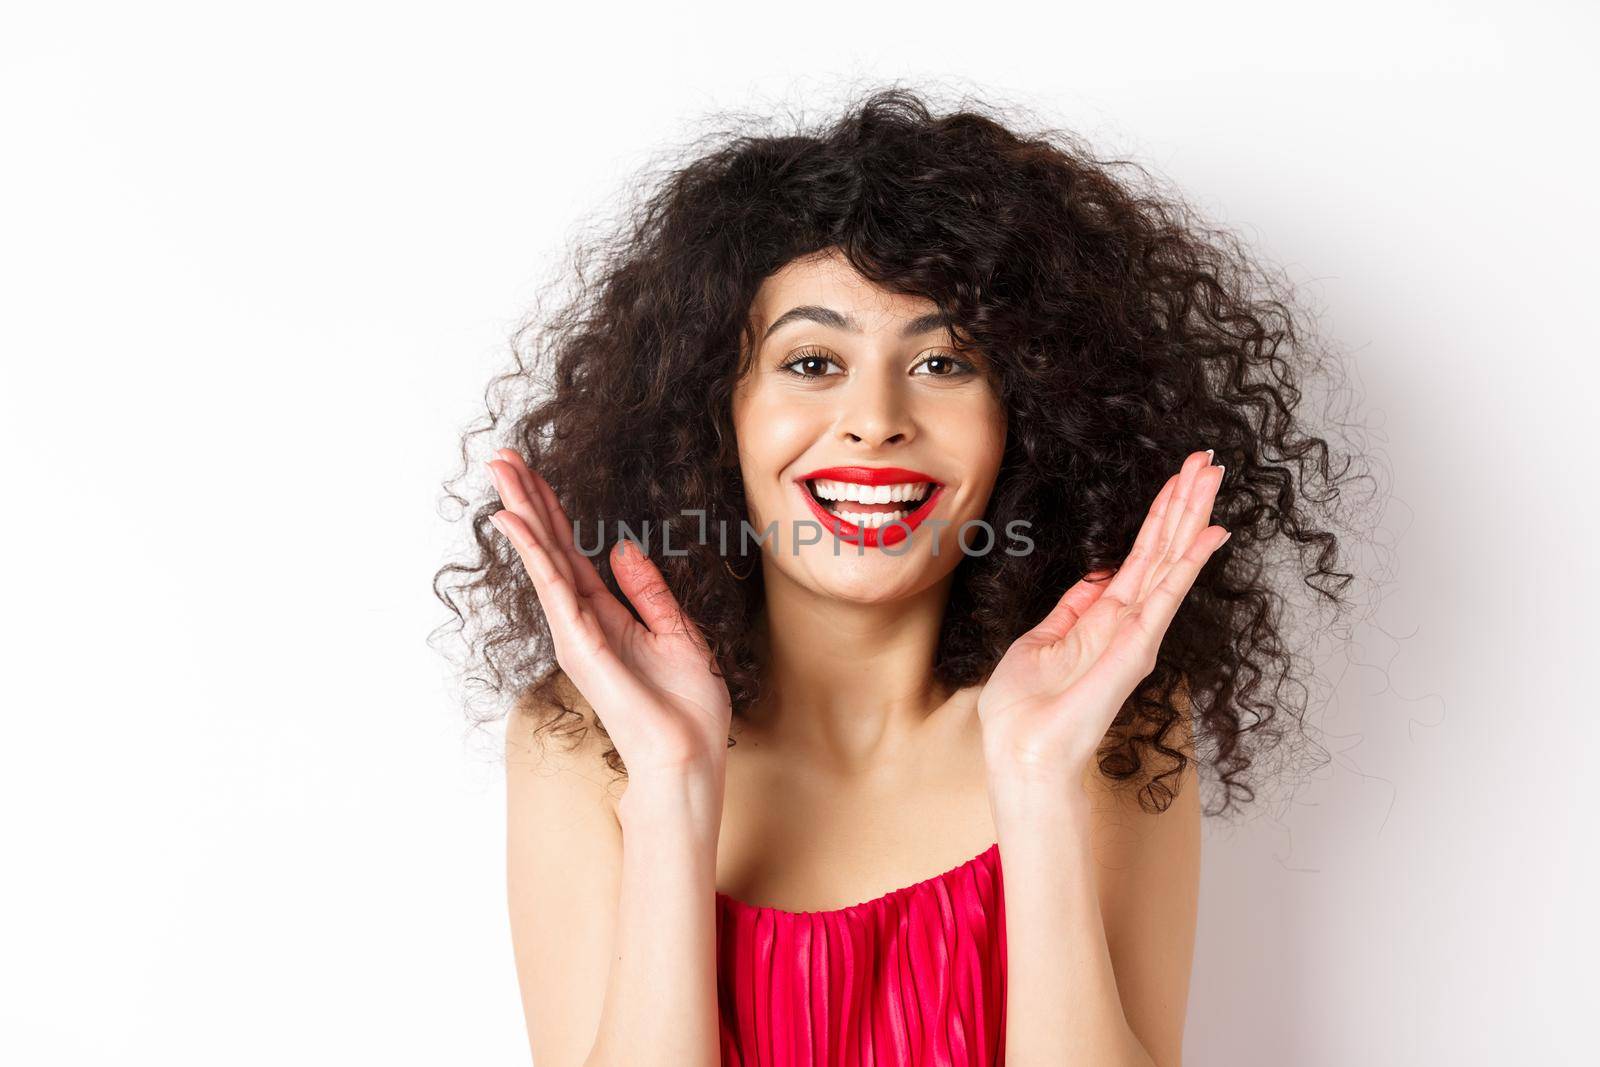 Close-up of fashionable woman with curly hair and red dress, clap hands smiling happy, applause you, standing on white background.